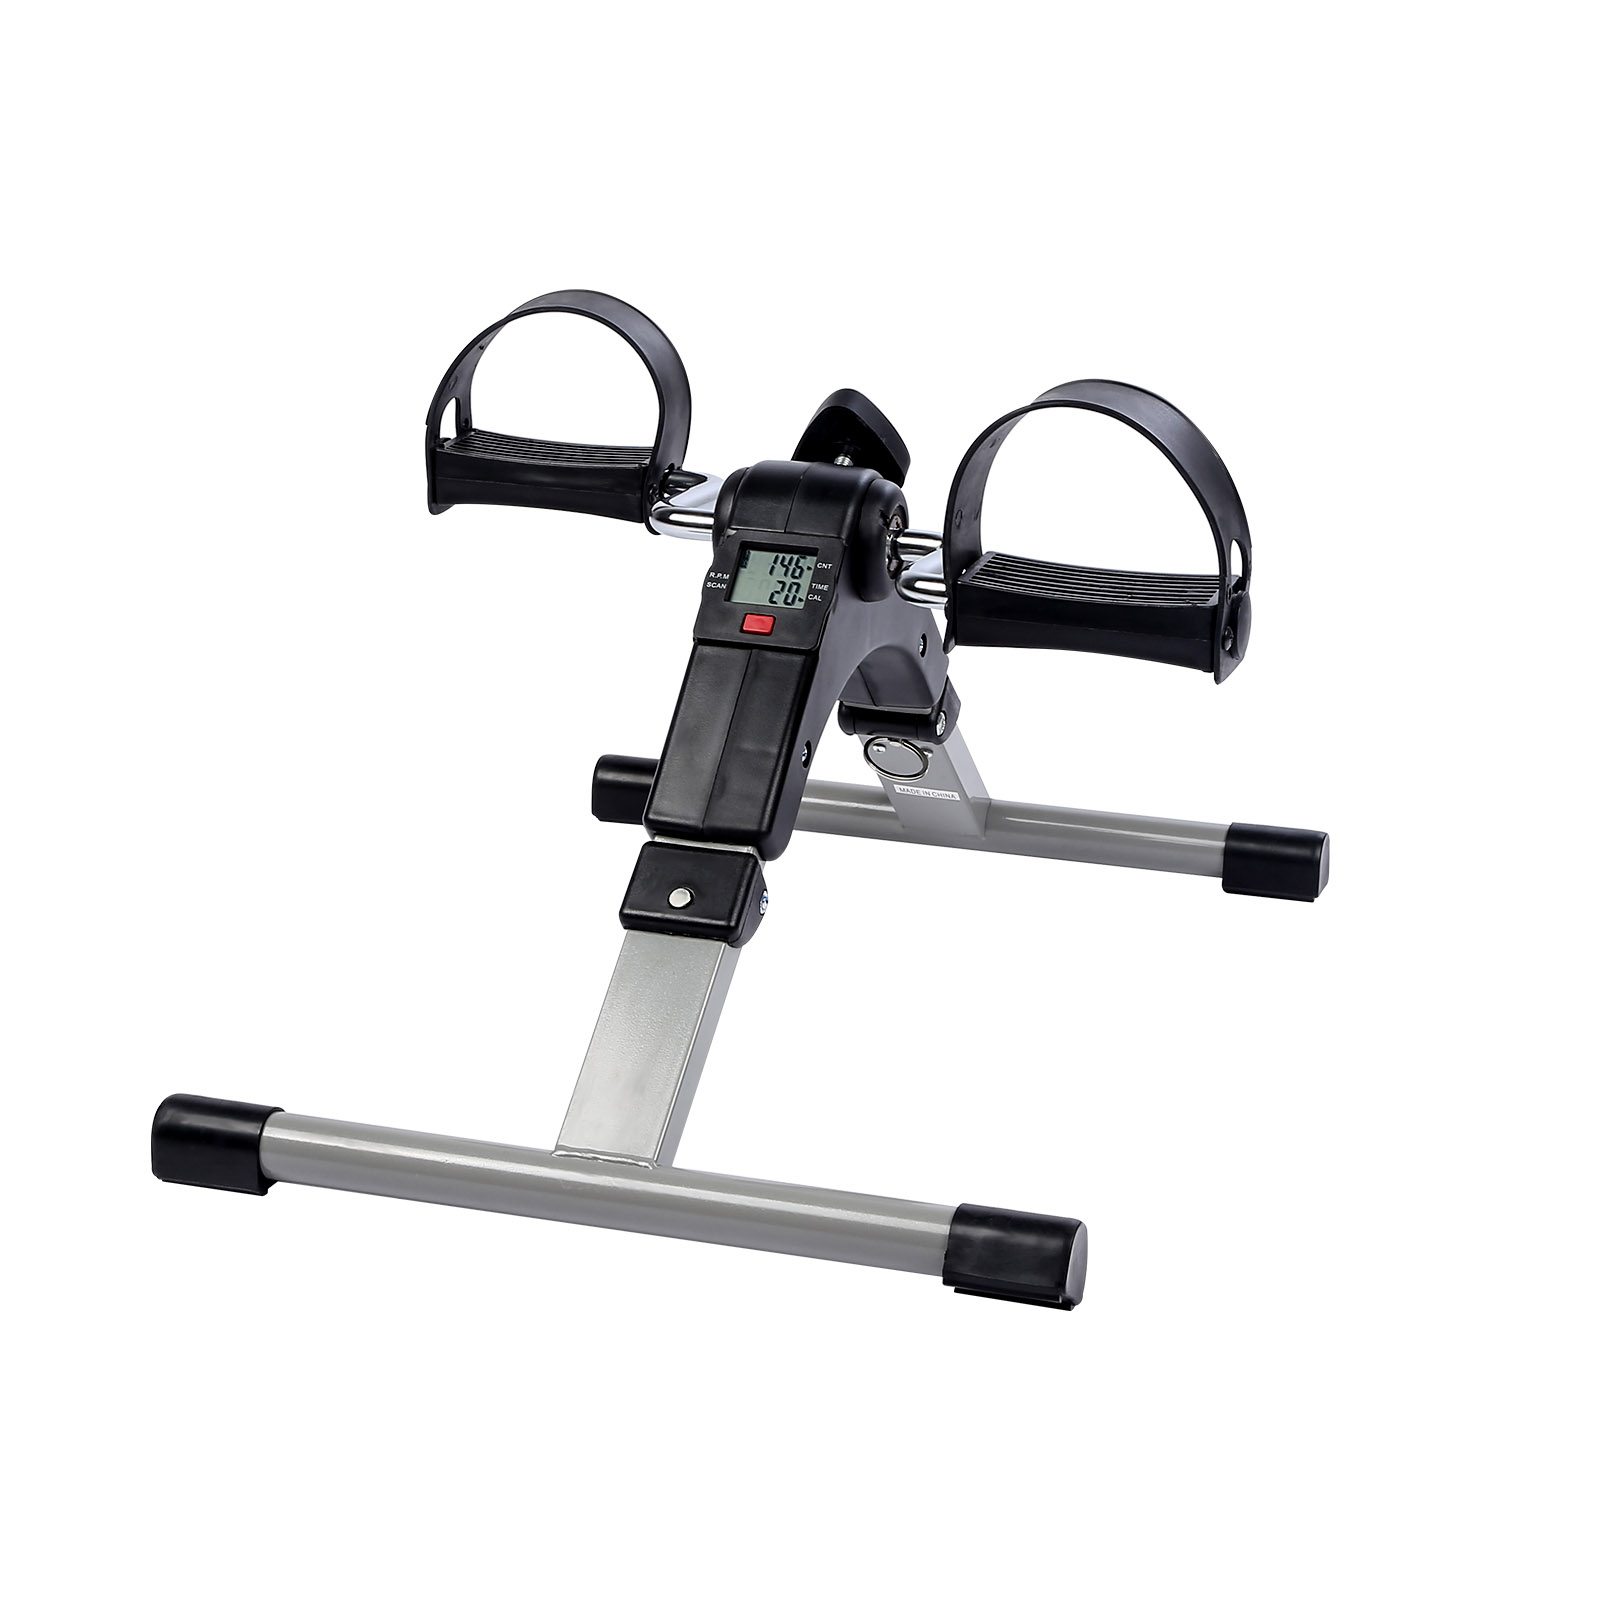 YSSOA Exercise Bike Indoor Cycling Training Stationary Exercise Equipment for Home Cardio Workout Cycle Bike Training-CASAINC